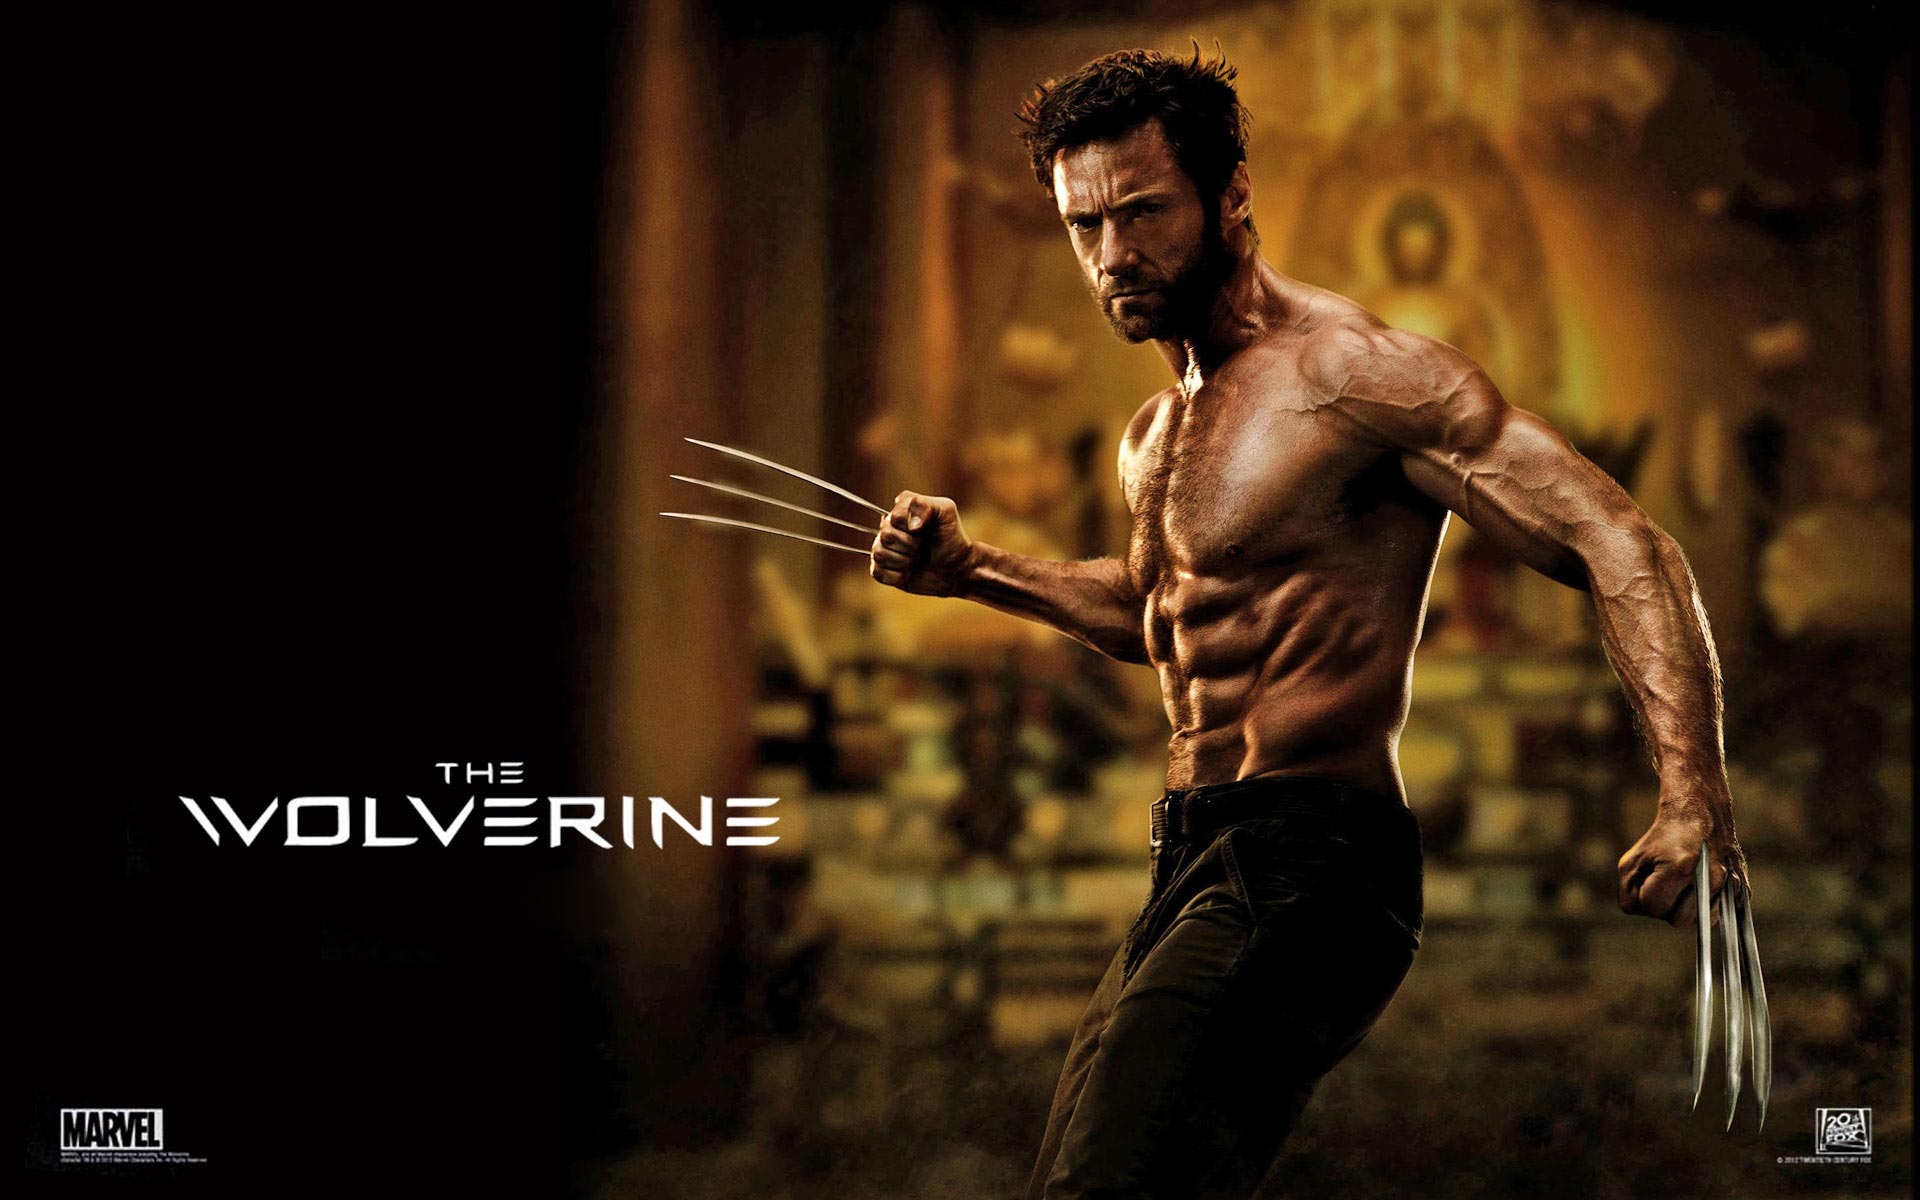 Movie Trailer: The Wolverine trailers actually look good